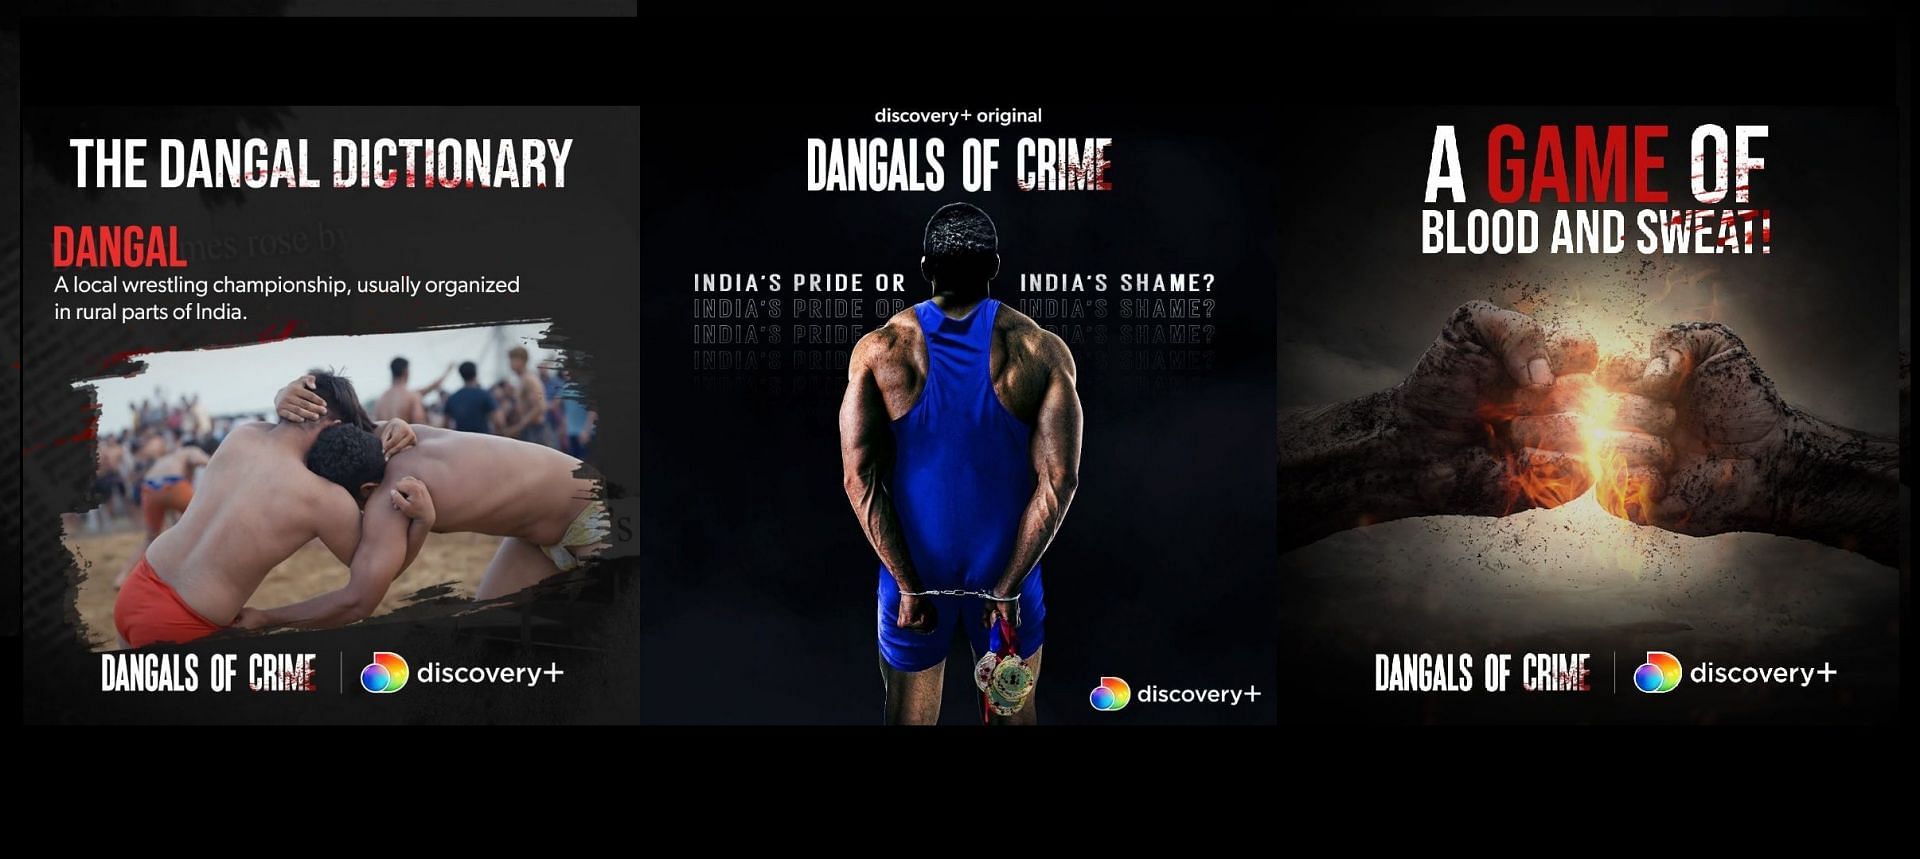 Dangals of Crime is the first discovery+ Original offering featuring a prominent topical sports story